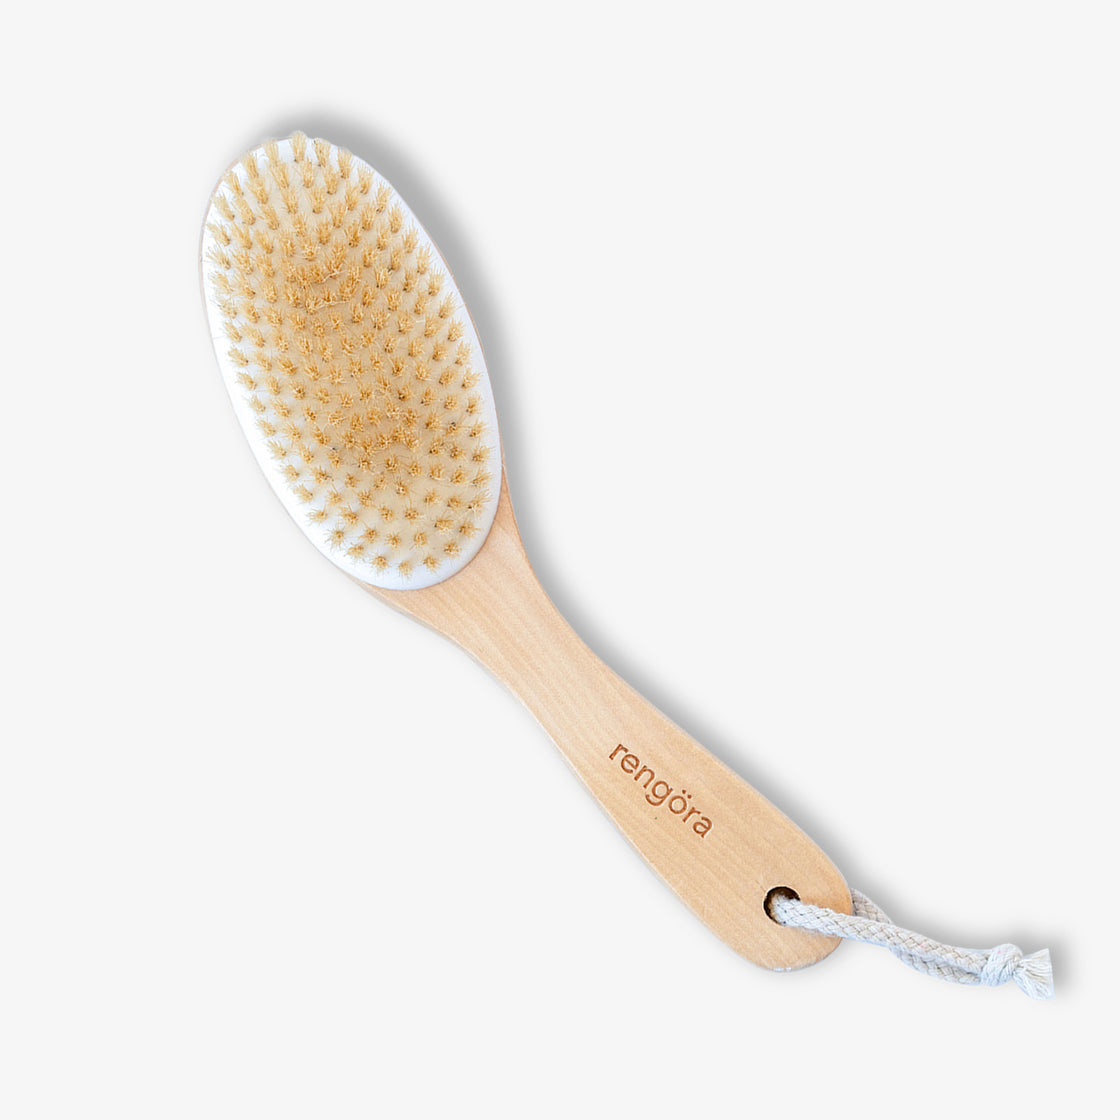  A detailed shot of a rengora dry body brush set against a simple white backdrop